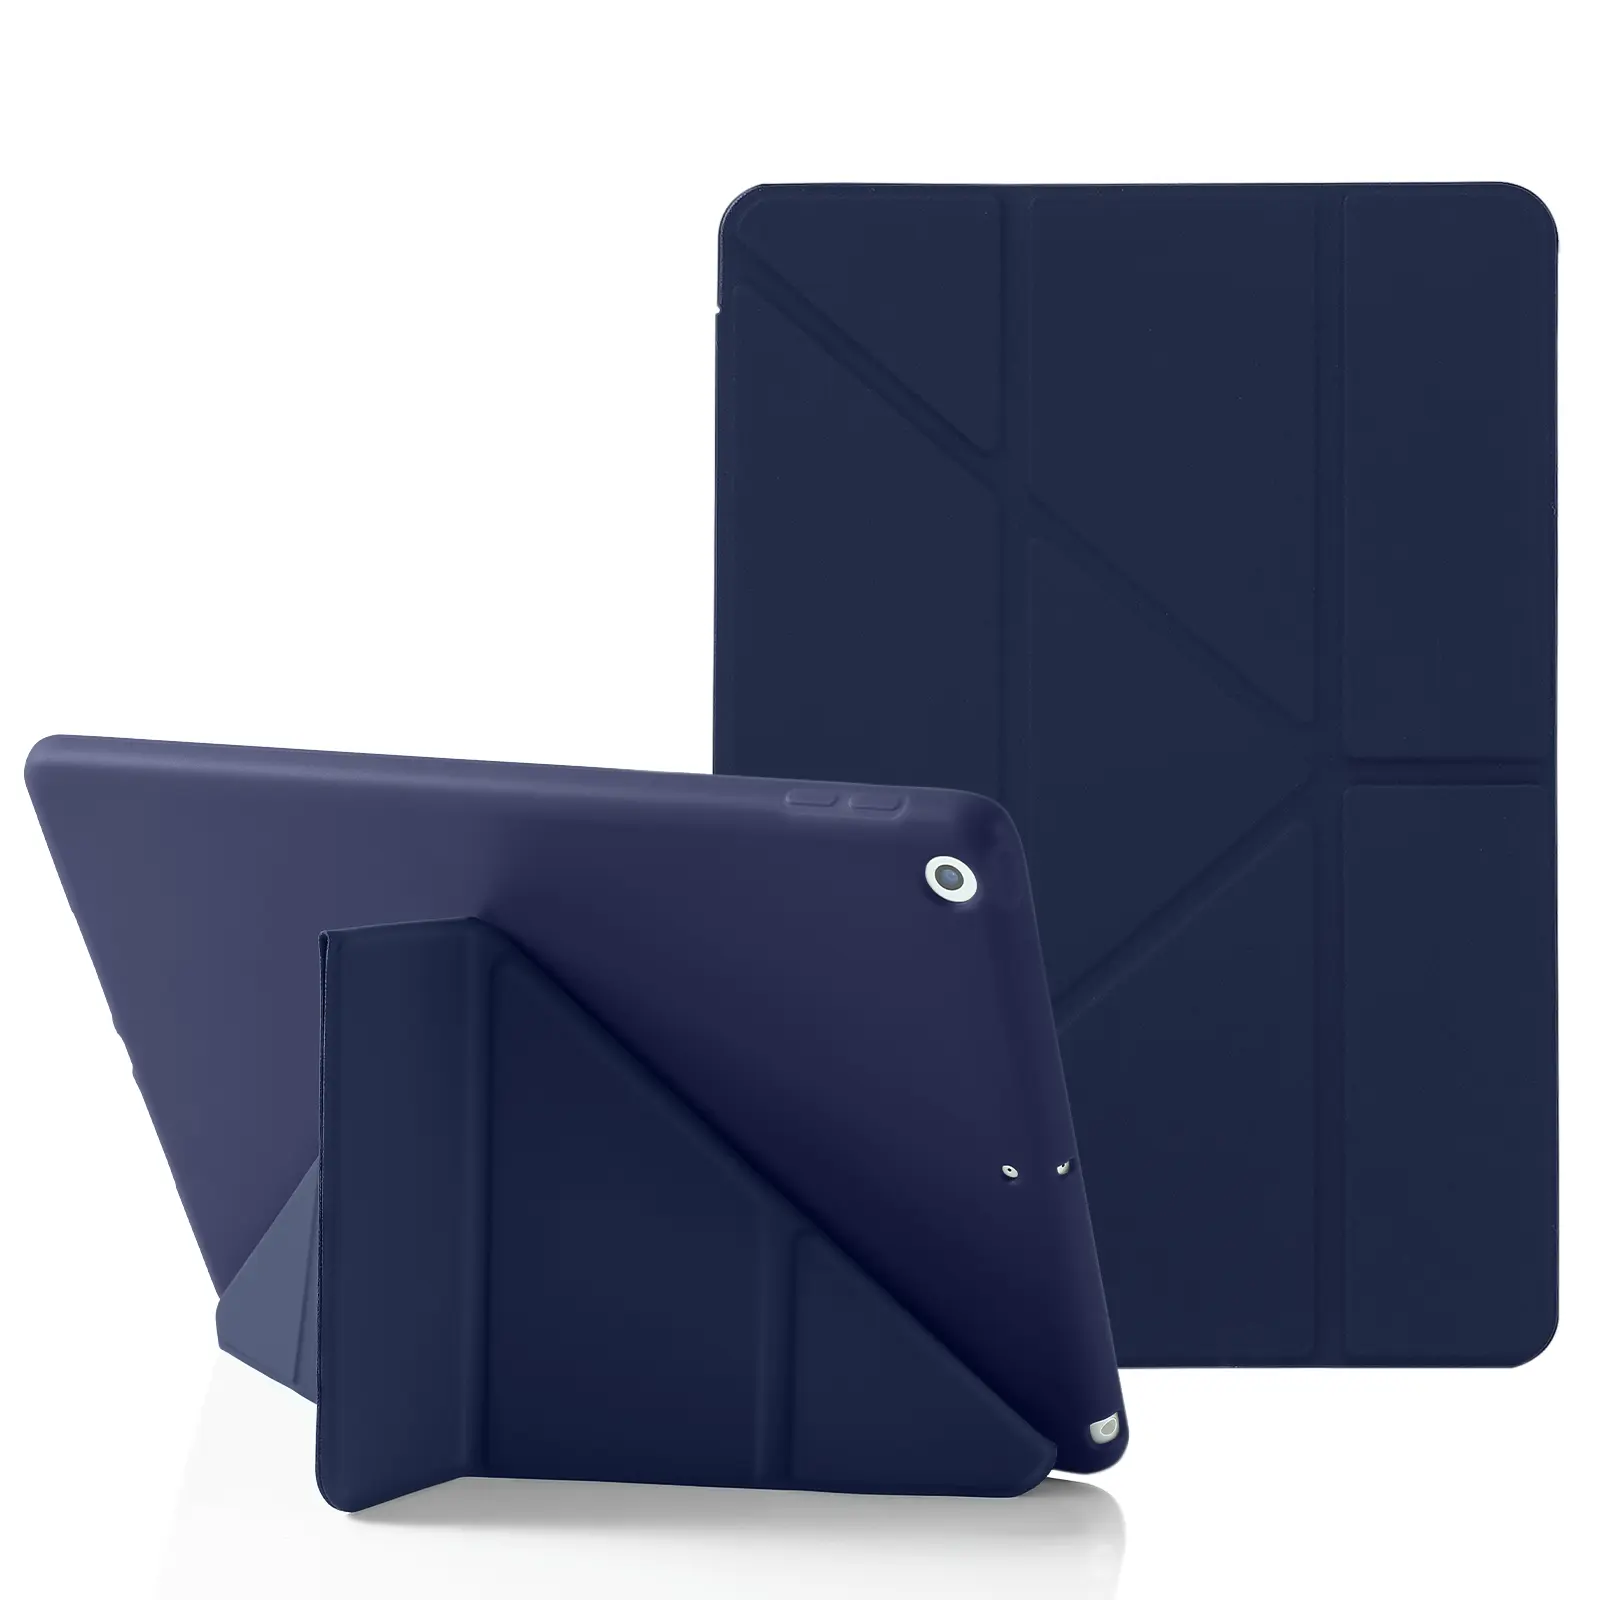 Y-Fold-Silicone-Tablet-Hülle weiches TPU-Hülle für Ipad Pro 11 Zoll 1 2 3 4 Generation Ipad Pro 12,9 Zoll